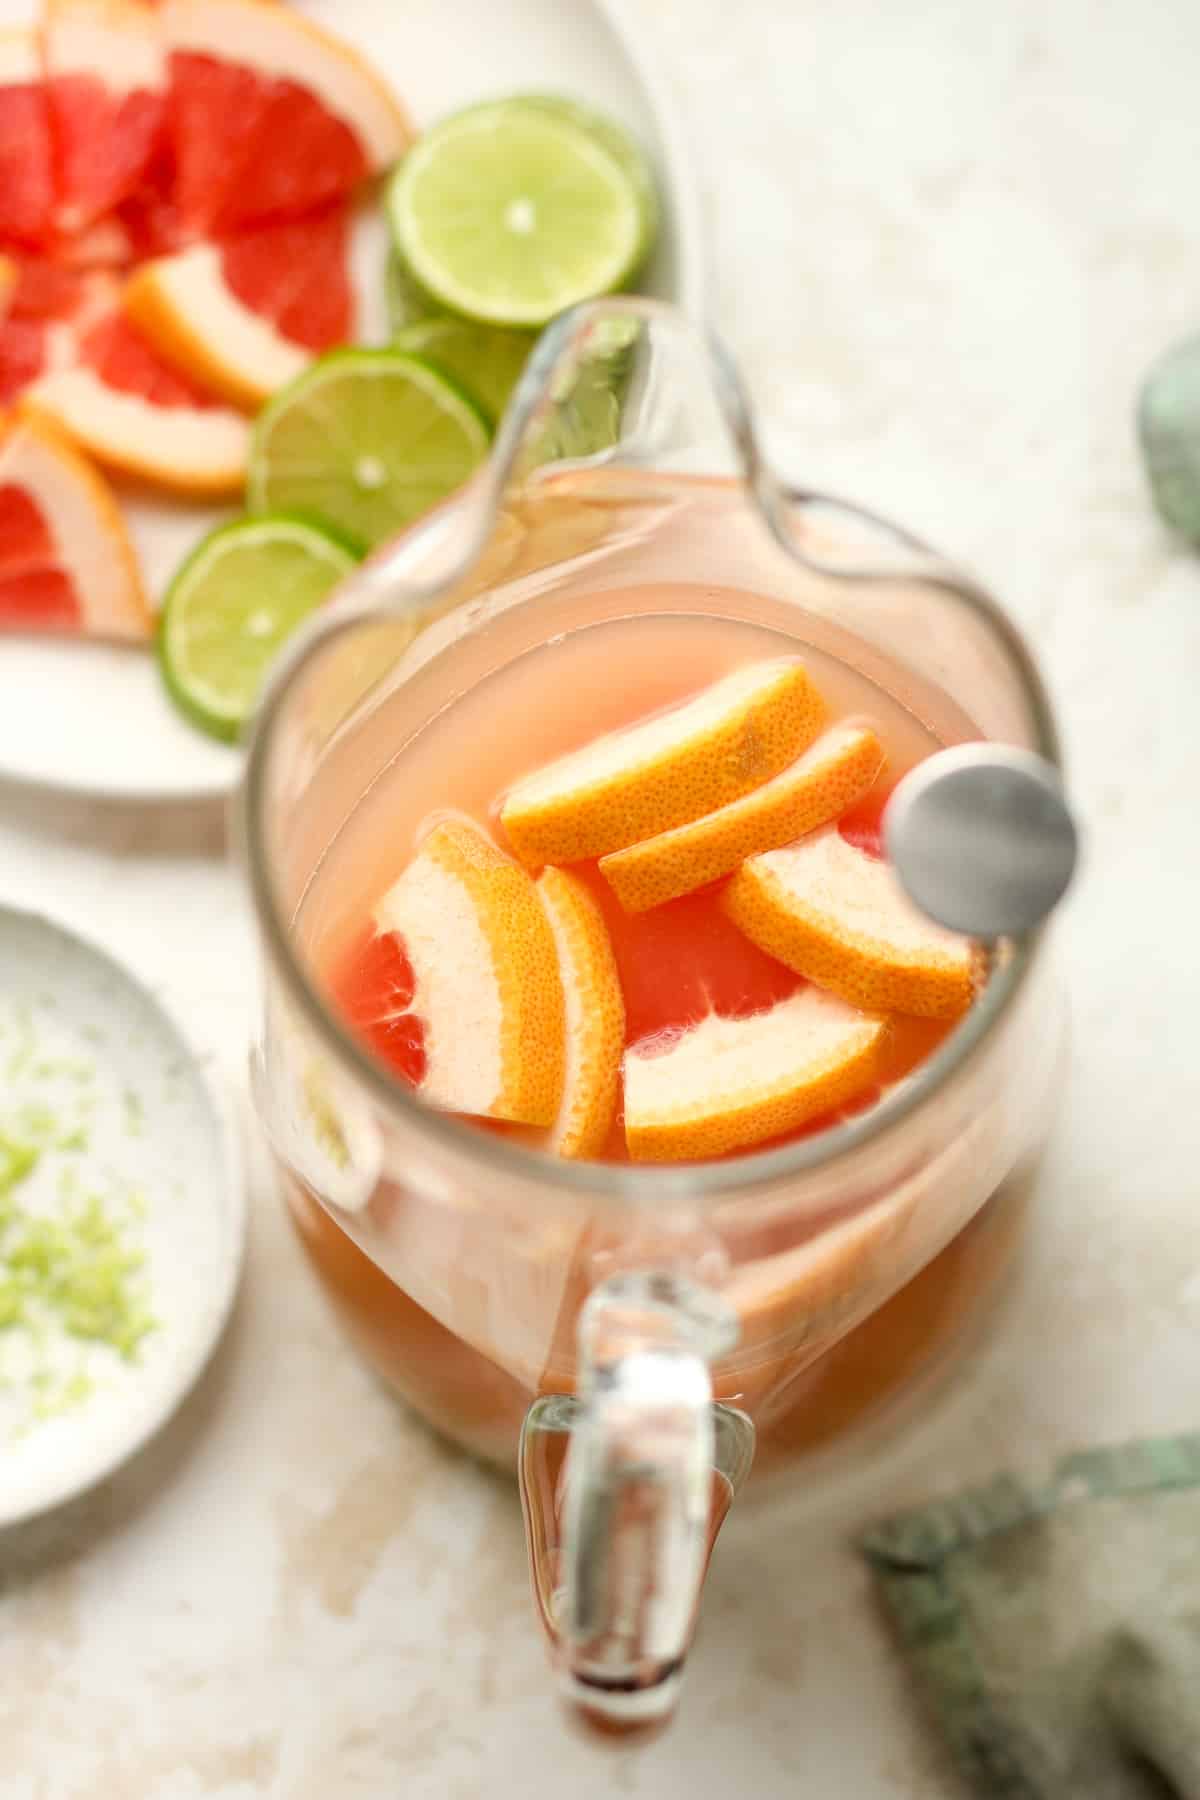 A pitcher of Paloma cocktail with grapefruit slices.